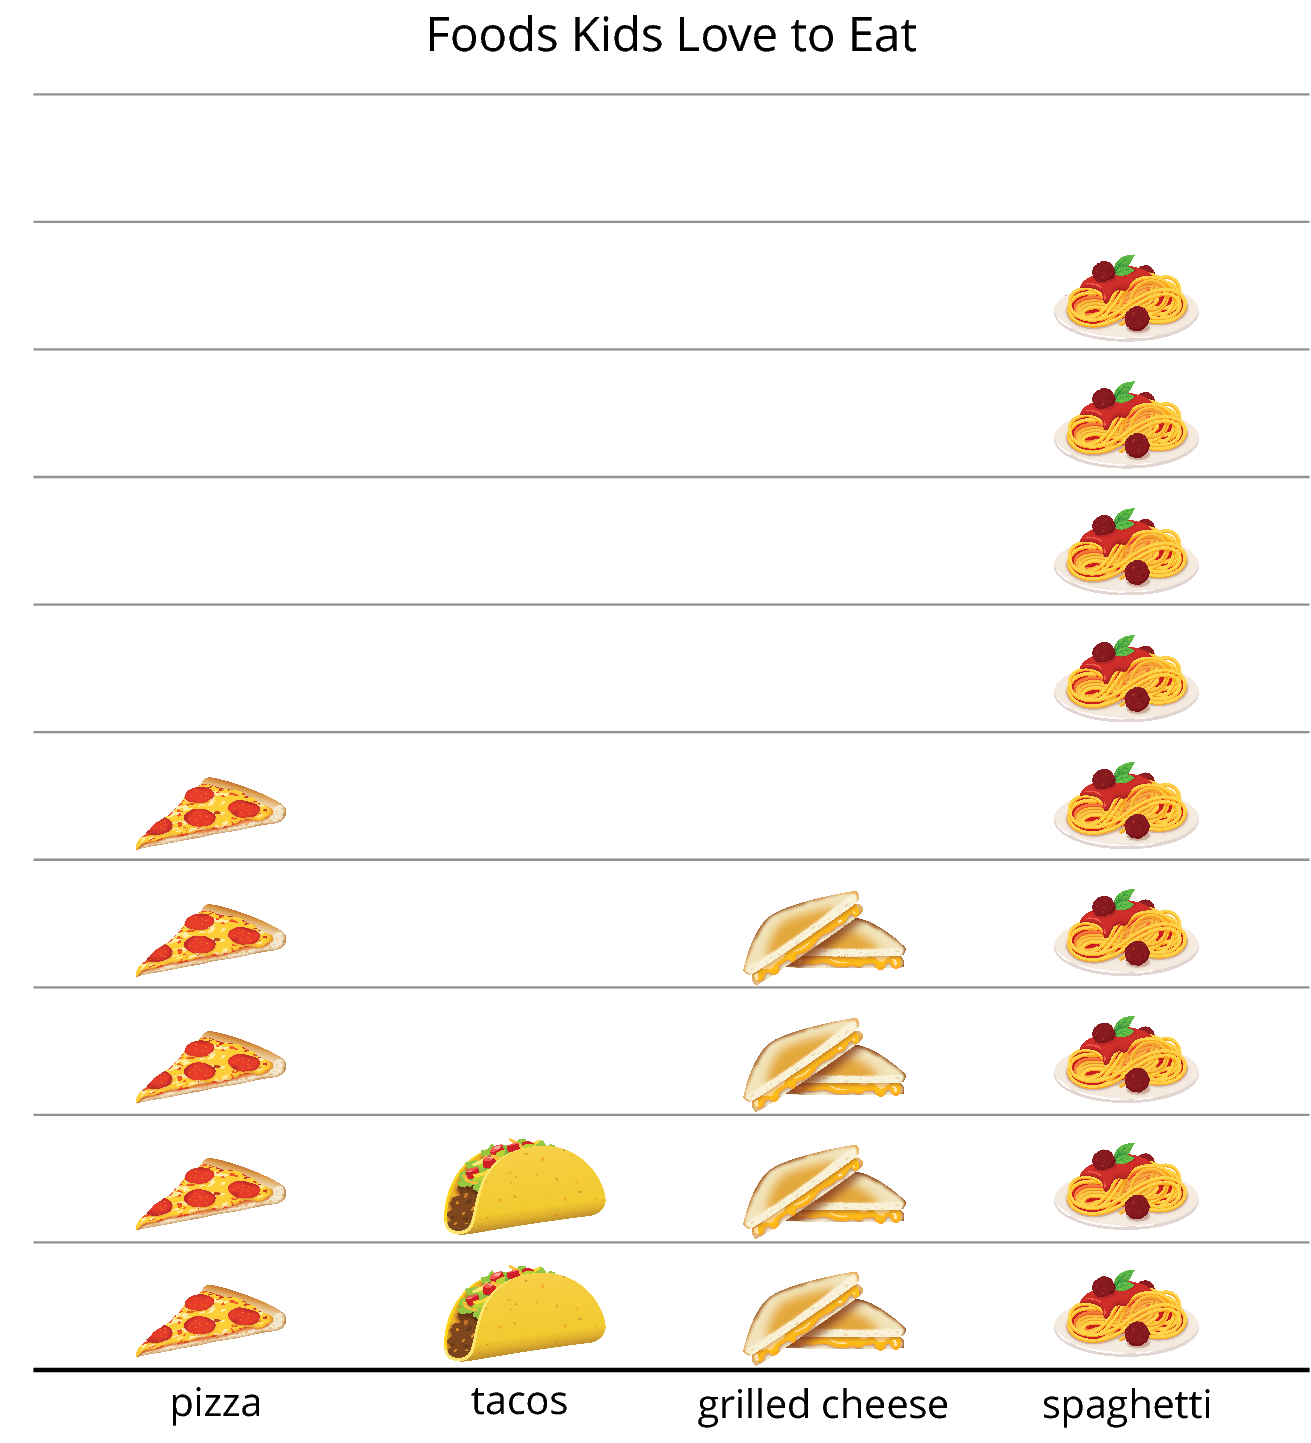 Picture Graph. Food Kids Love To Eat. Key: picture of food item represents one response. Pizza, 5 pizza pictures. Tacos, 2 taco pictures. Grilled Cheese, 4 grilled cheese pictures. Spaghetti, 9 spaghetti pictures.